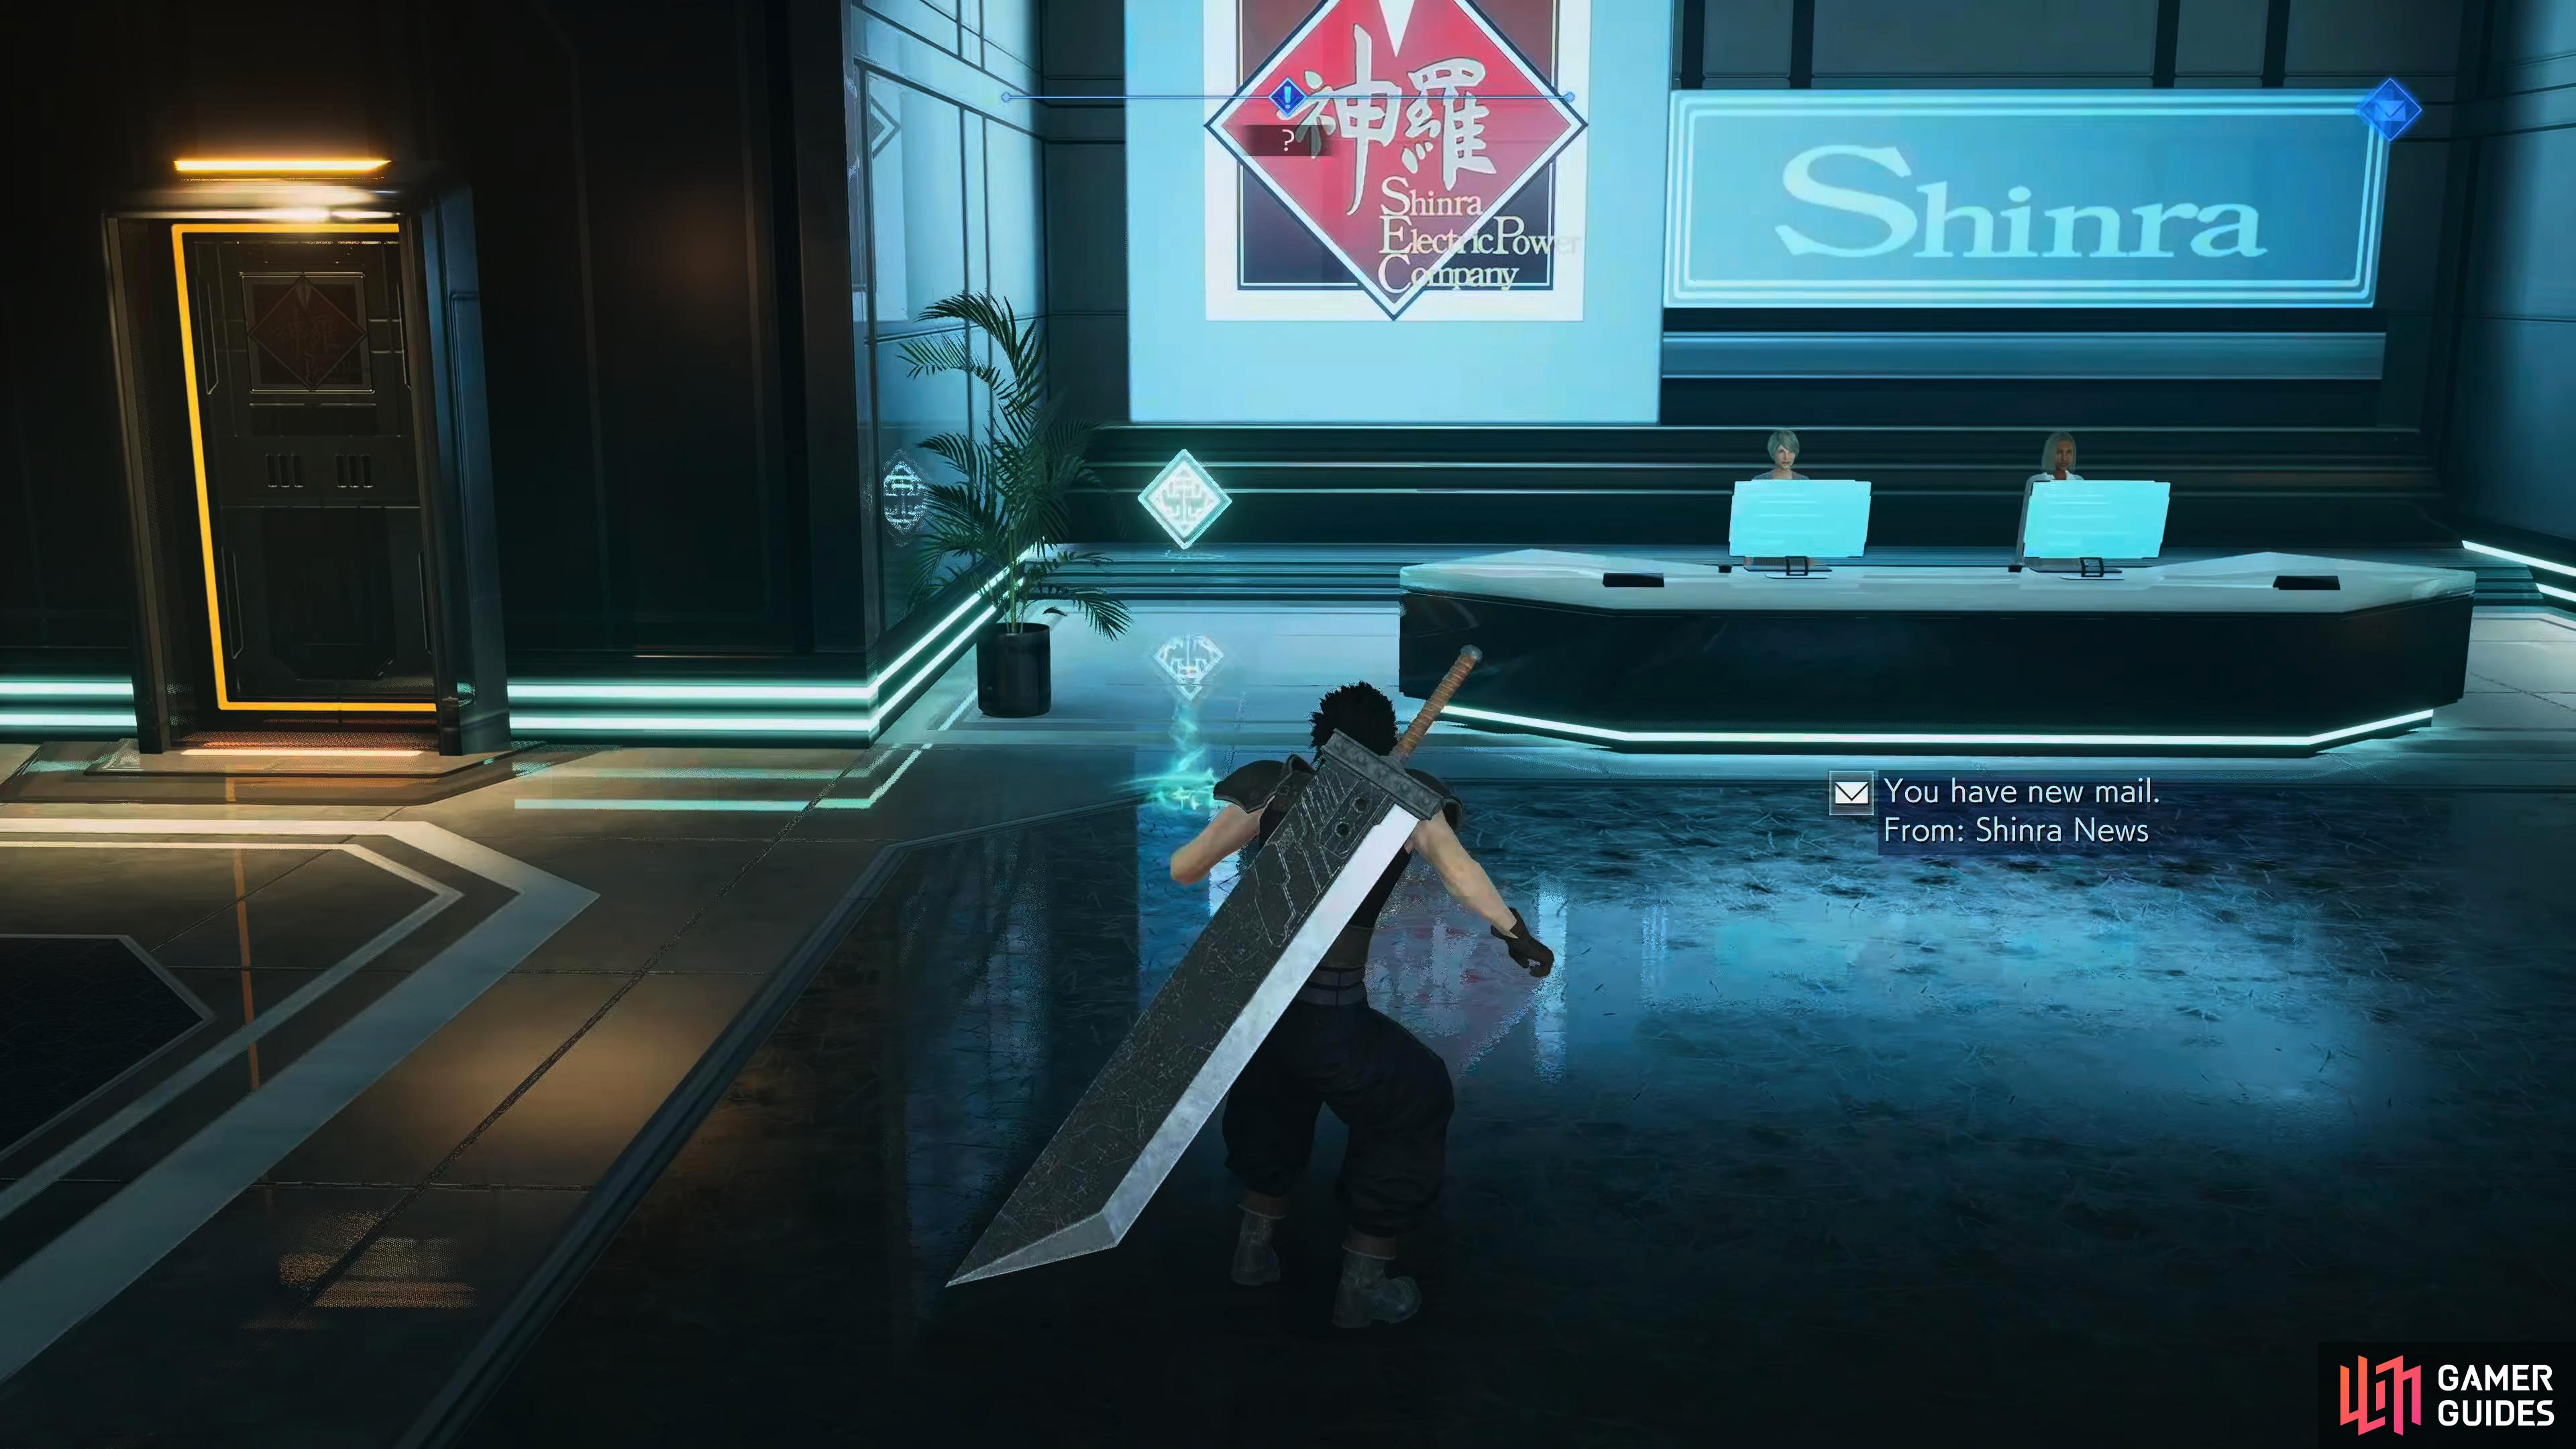 This mail can be obtained by walking towards the reception desk in the Shinra Building.